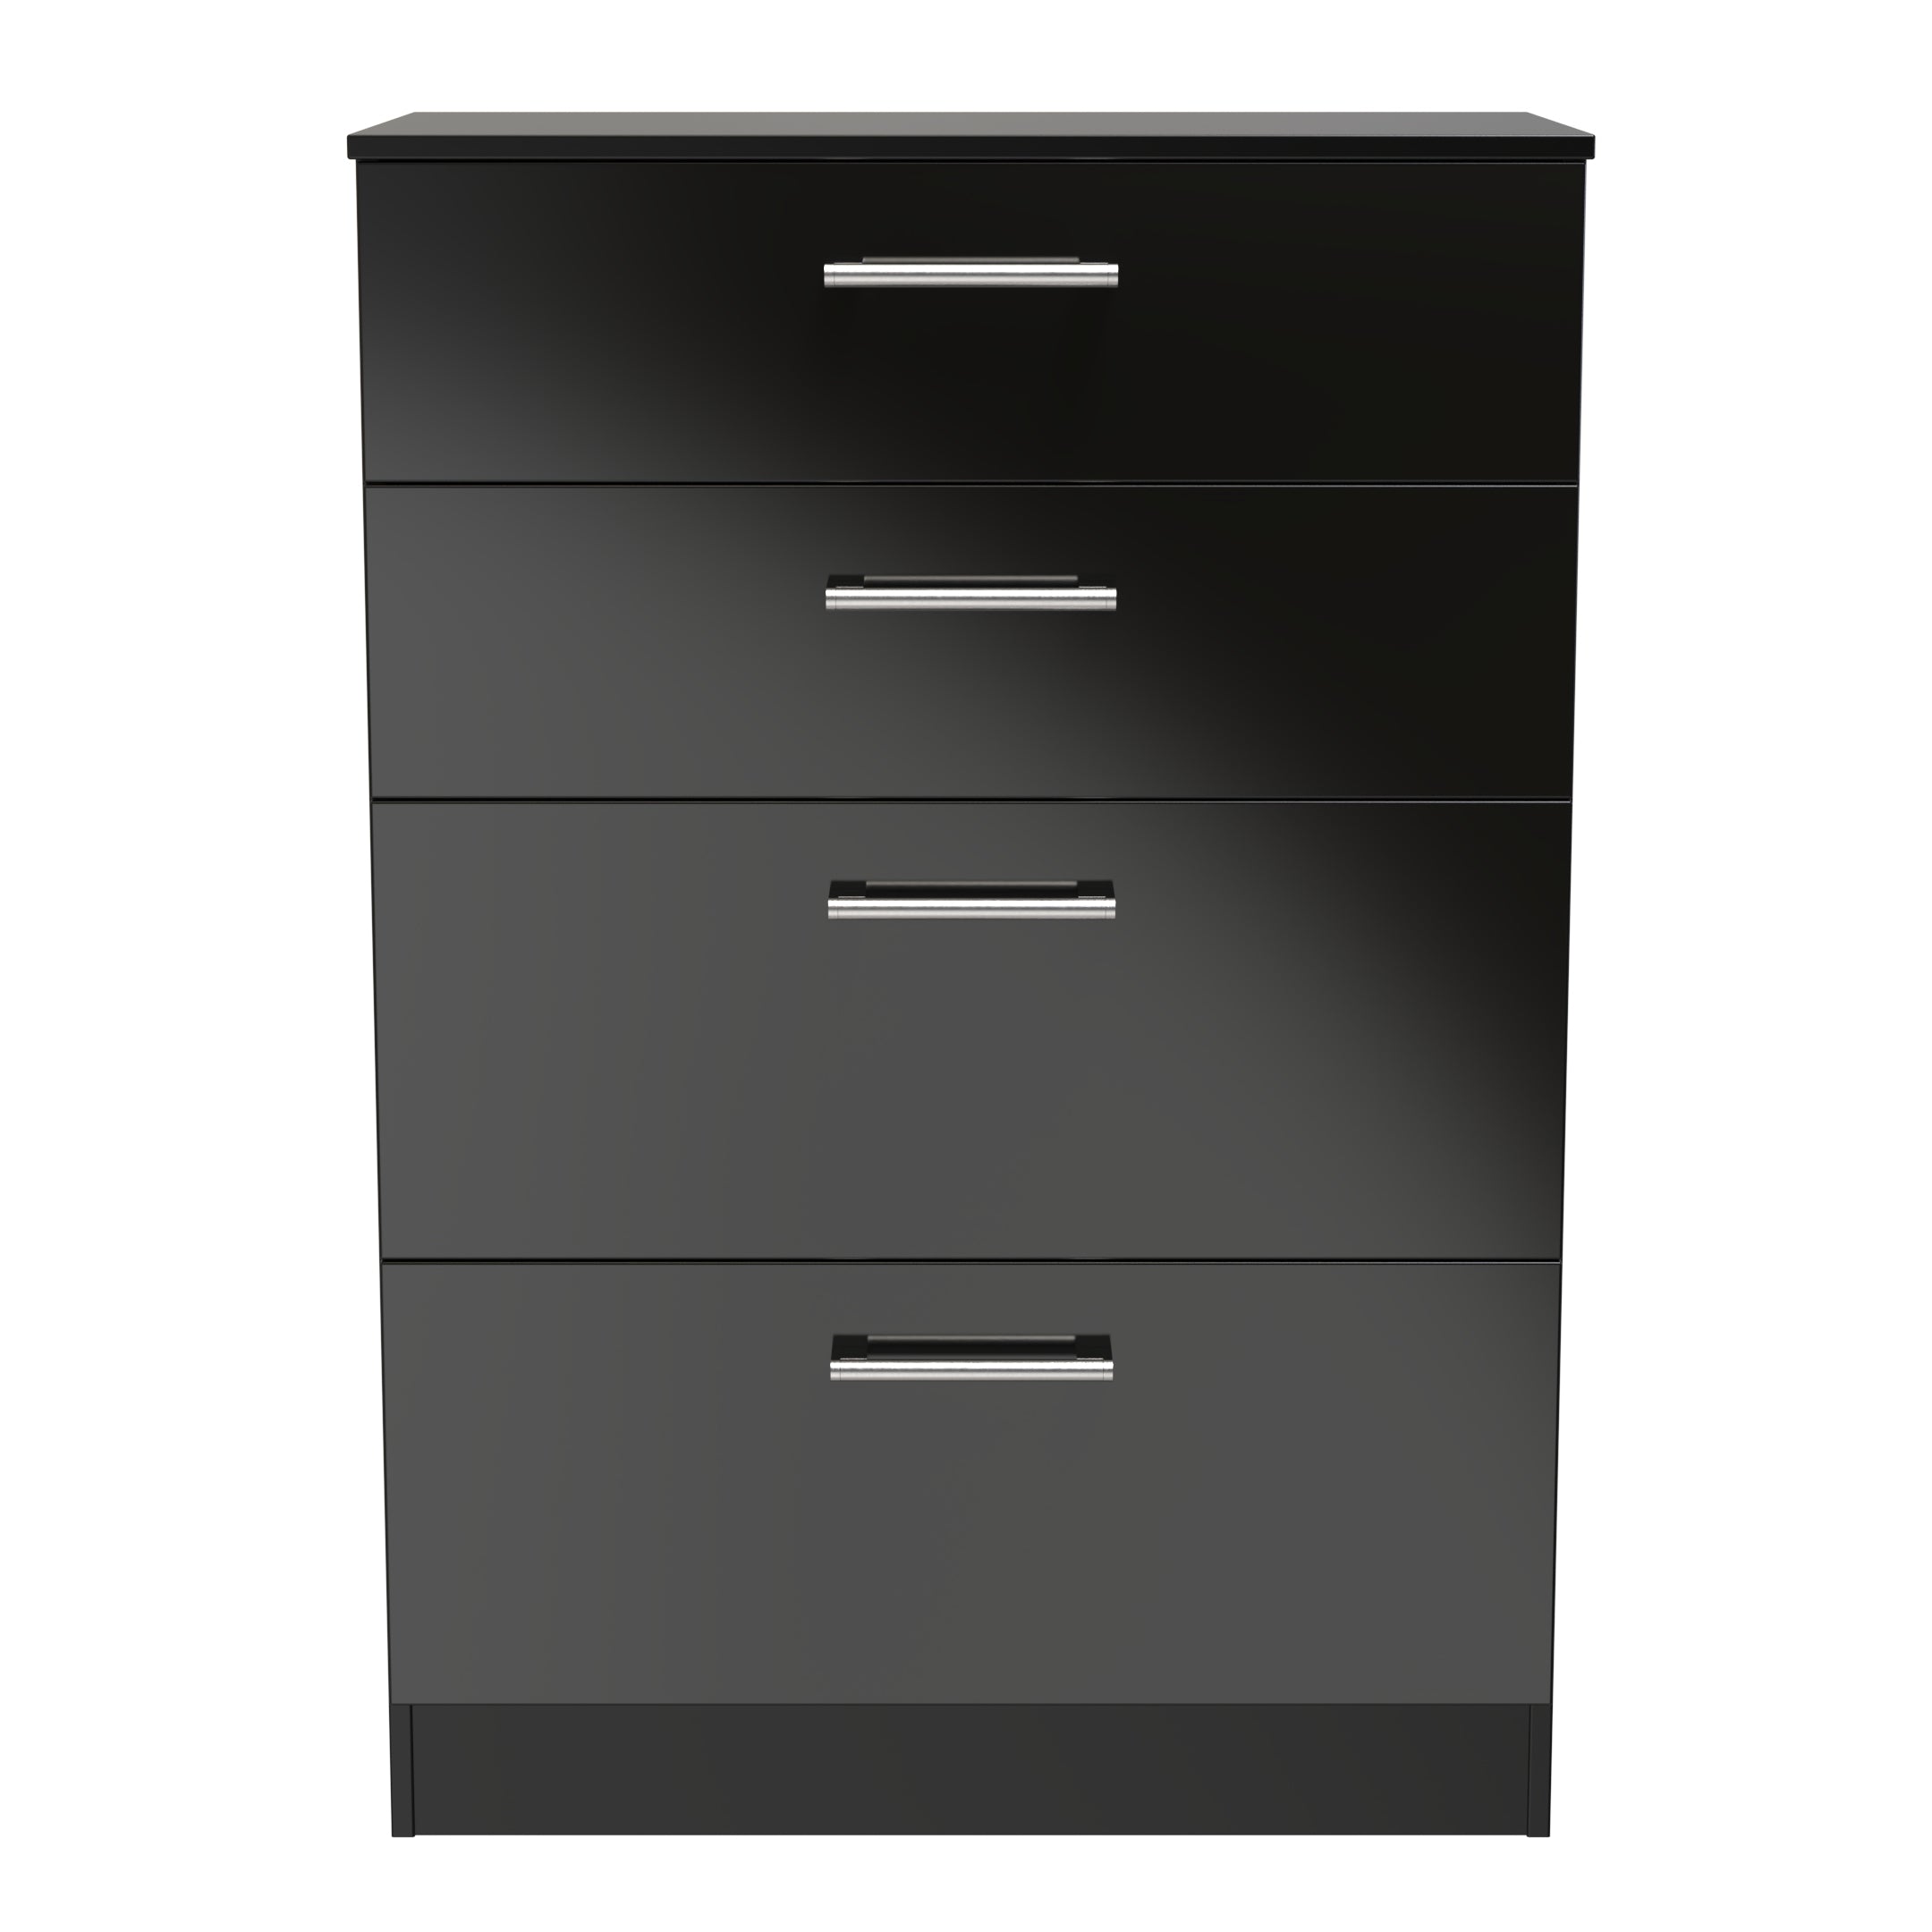 Denver Ready Assembled Chest Of Drawers with 4 Drawers - Black - Lewis’s Home  | TJ Hughes